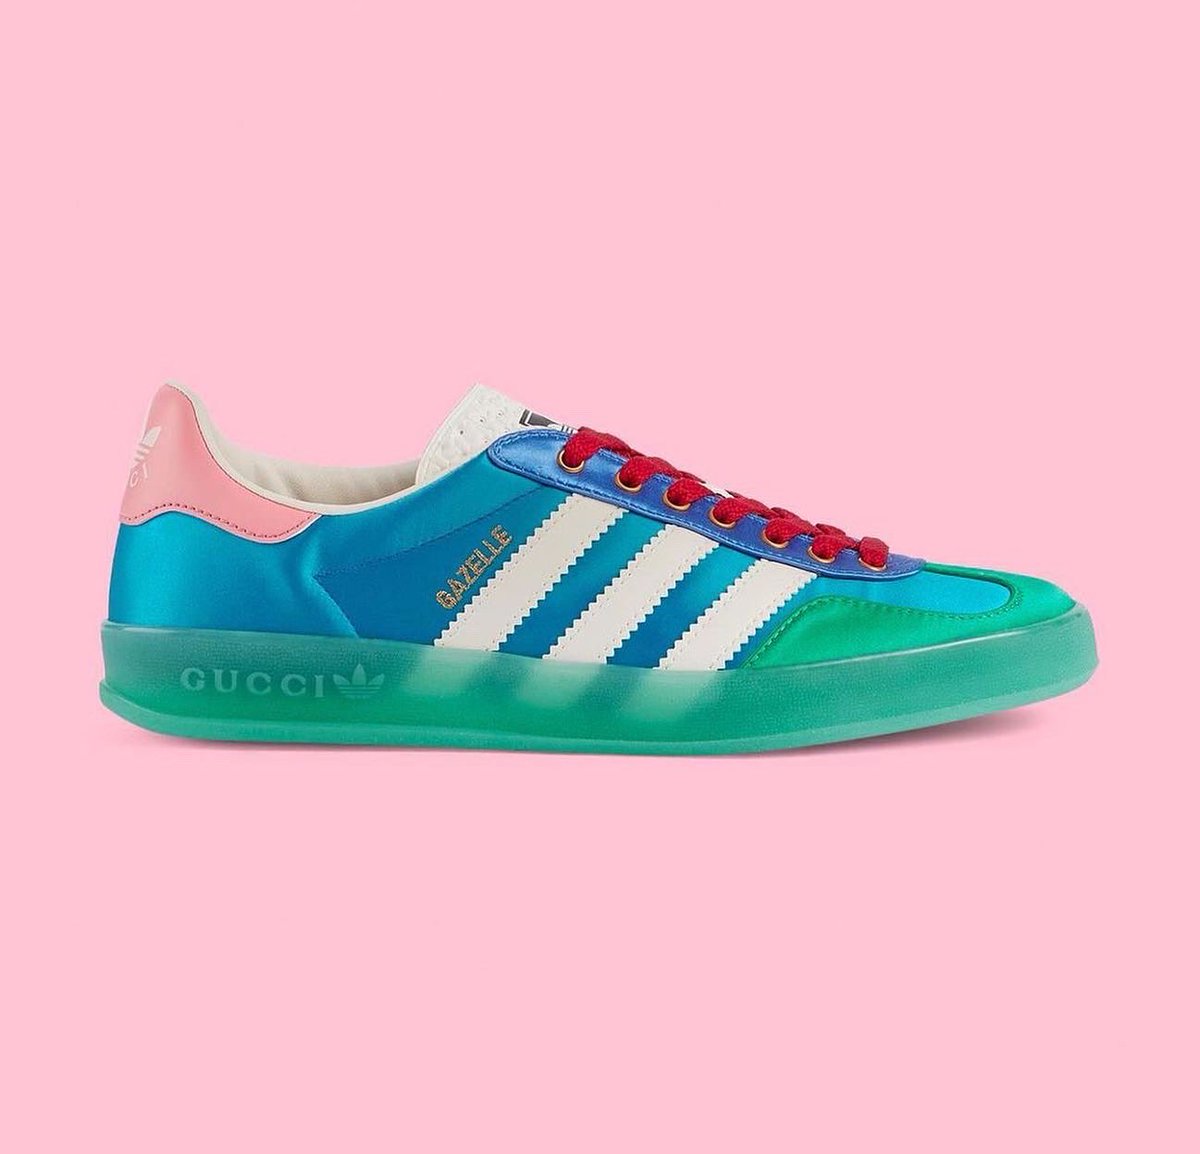 Desconexión Trascendencia Aditivo Ovrnundr on Twitter: "Gucci x Adidas Gazelle collection official look,  releasing June 7th, including eight different colourways, retail $850  dollars. Available https://t.co/dIDkZd6U2K, Confirmed App,  https://t.co/fgFzXaOAwV and select retailers. Photo ...